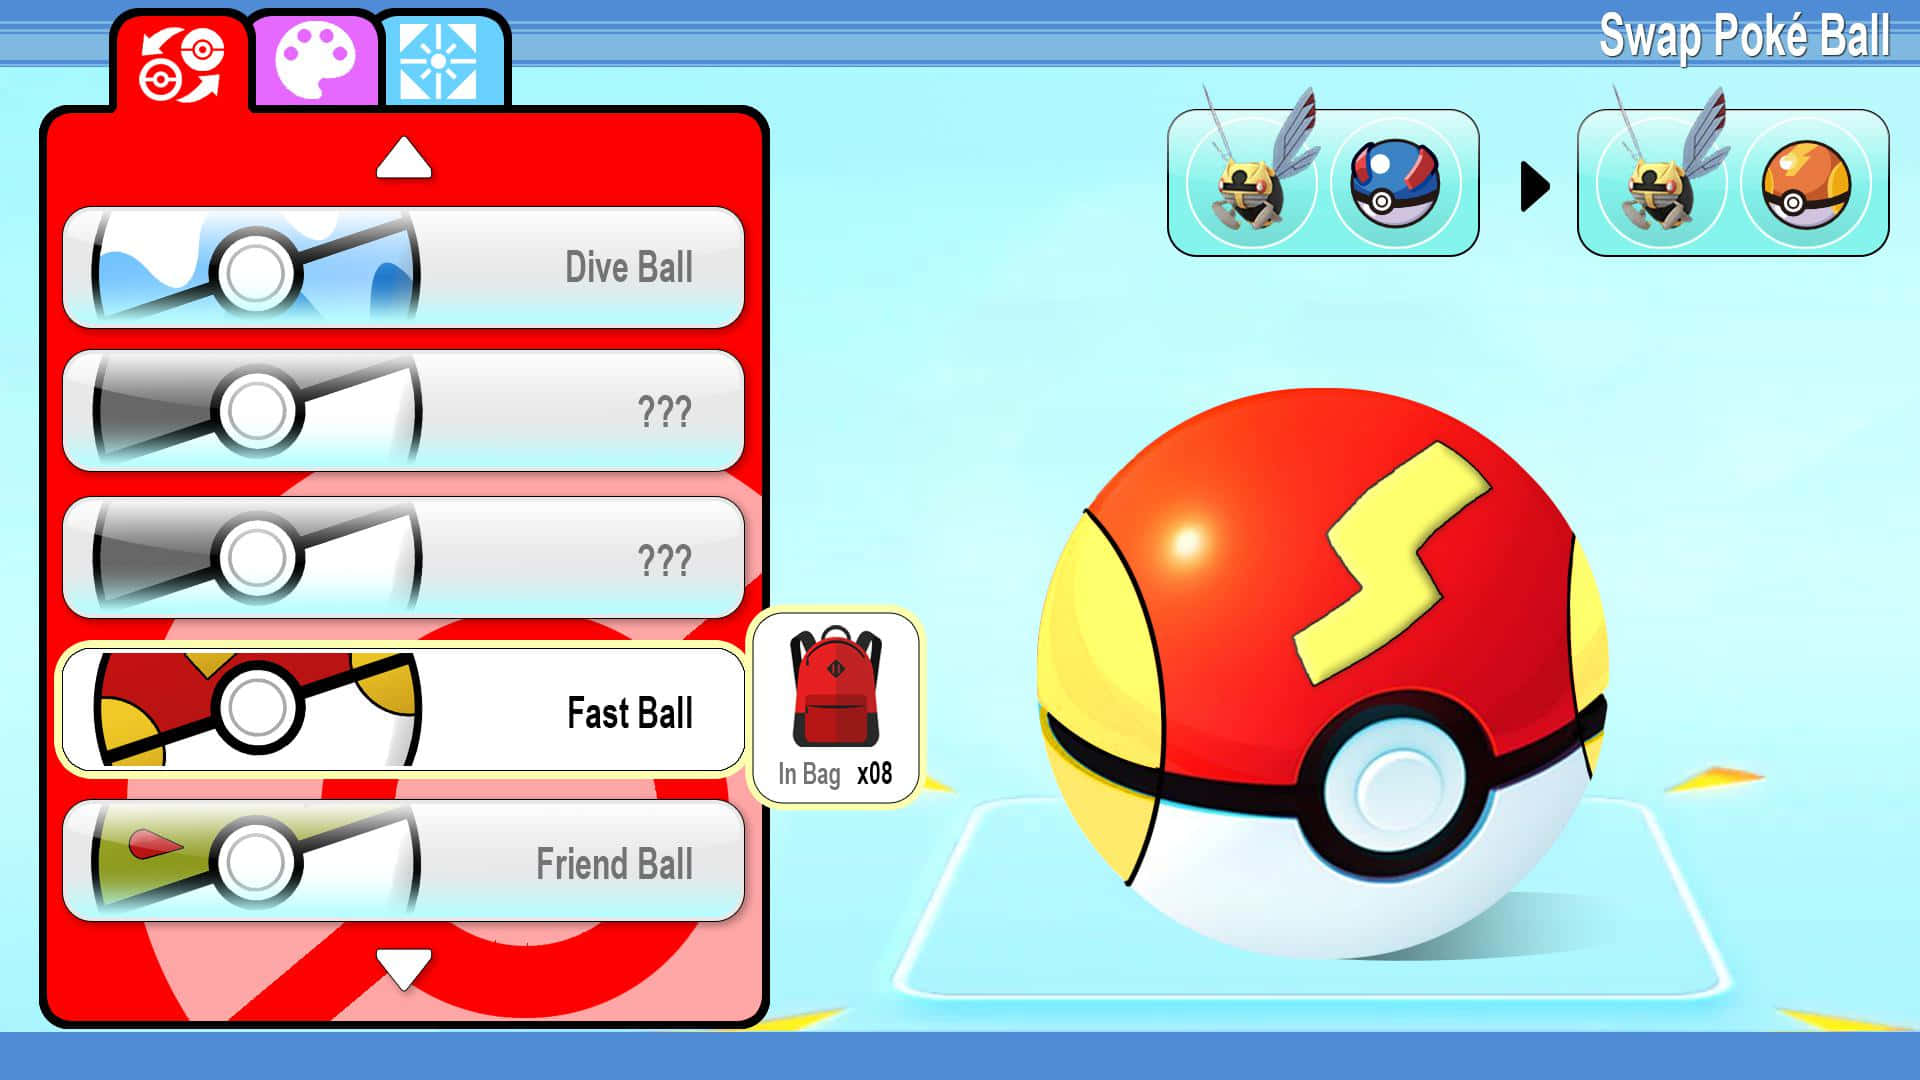 Catch your favorite Pokemon with an original Pokeball